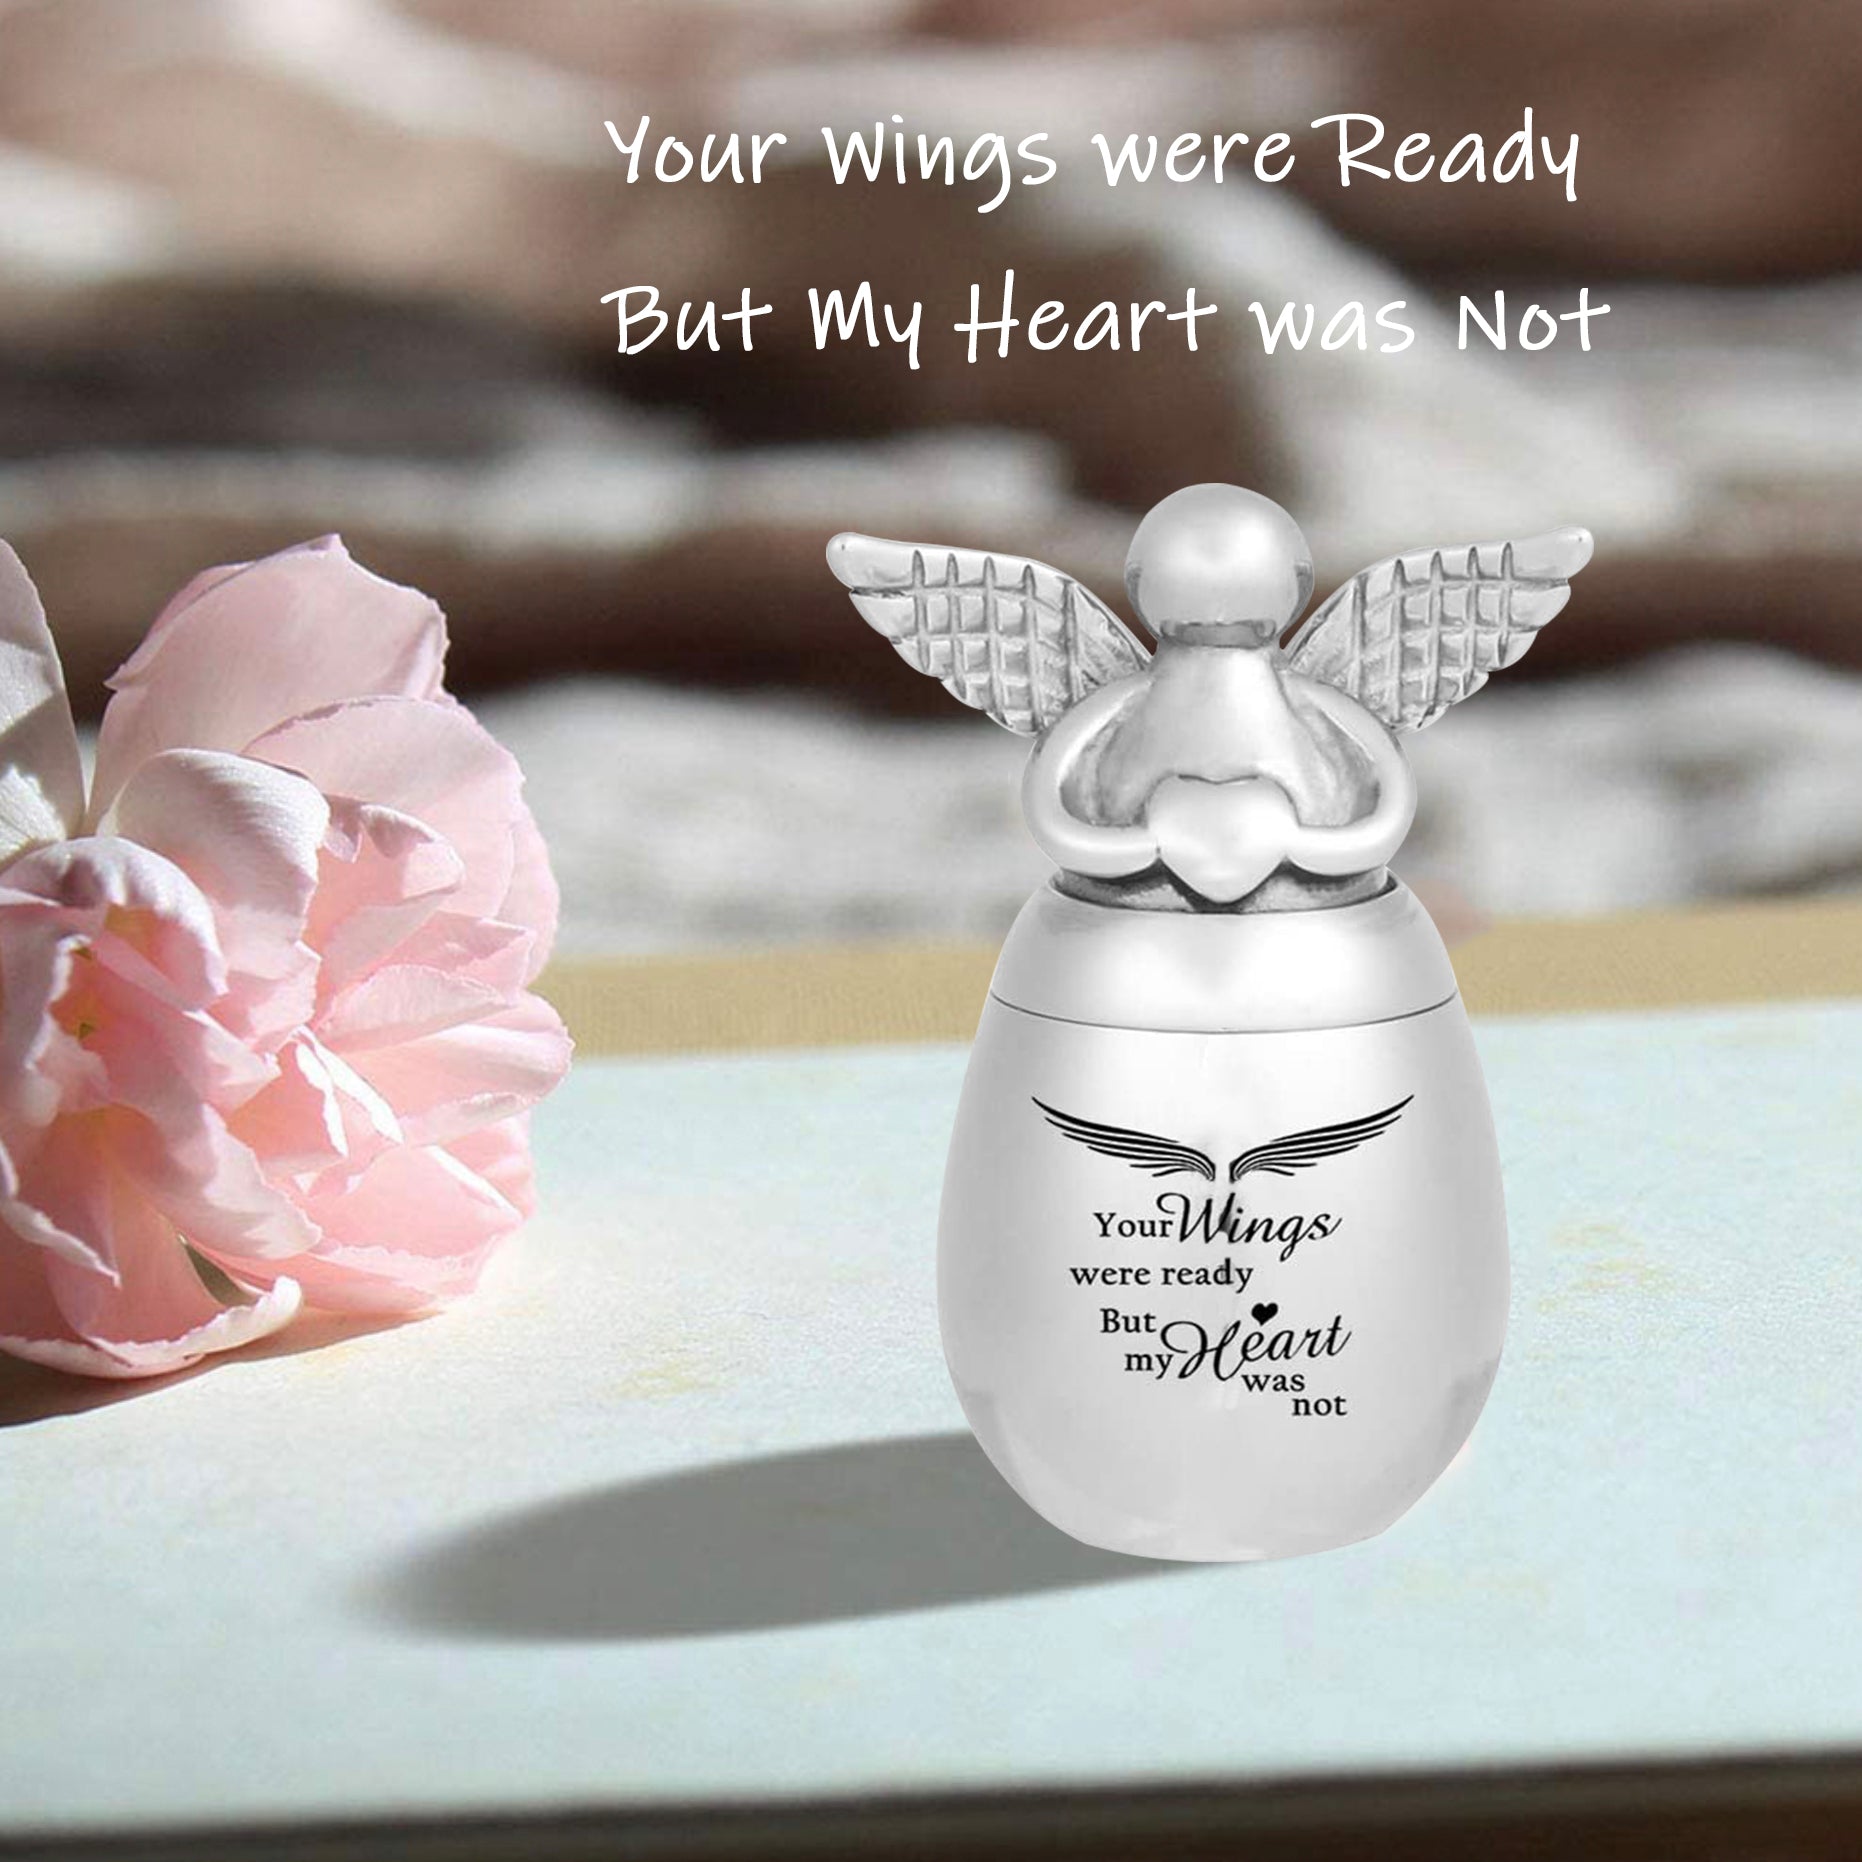 Mini Angel Keepsake Urn for Ashes-Your Wings were Ready, But My Heart was Not